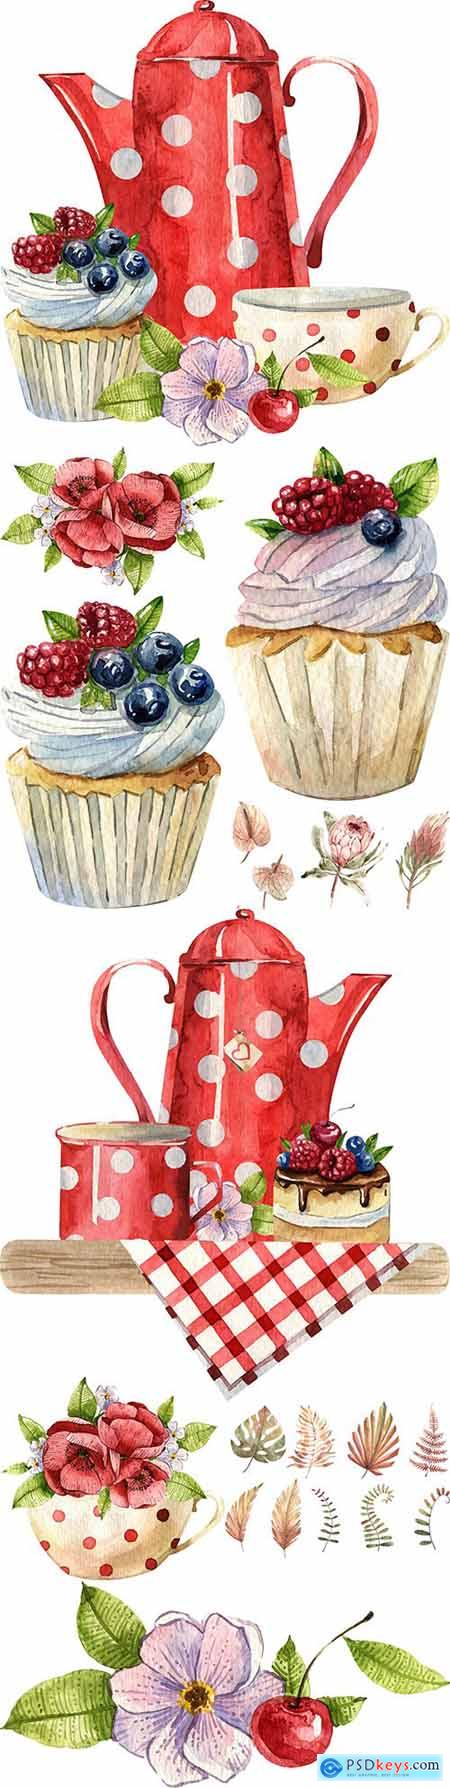 Breakfast tea time and cake summer watercolor illustration